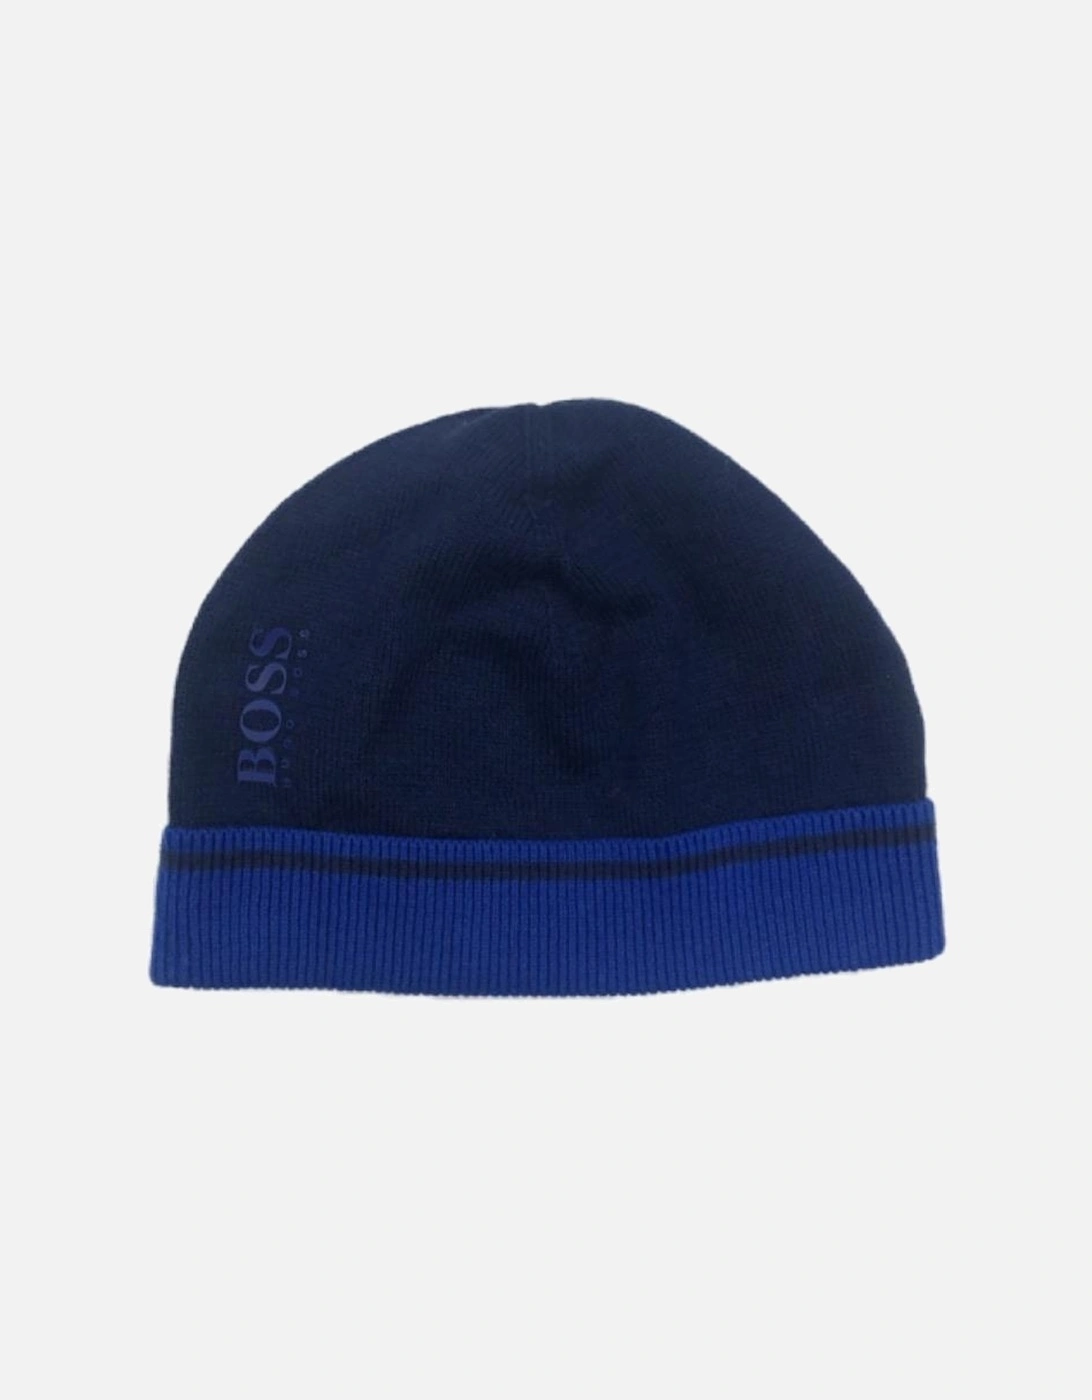 Boys Blue Knitted Hat